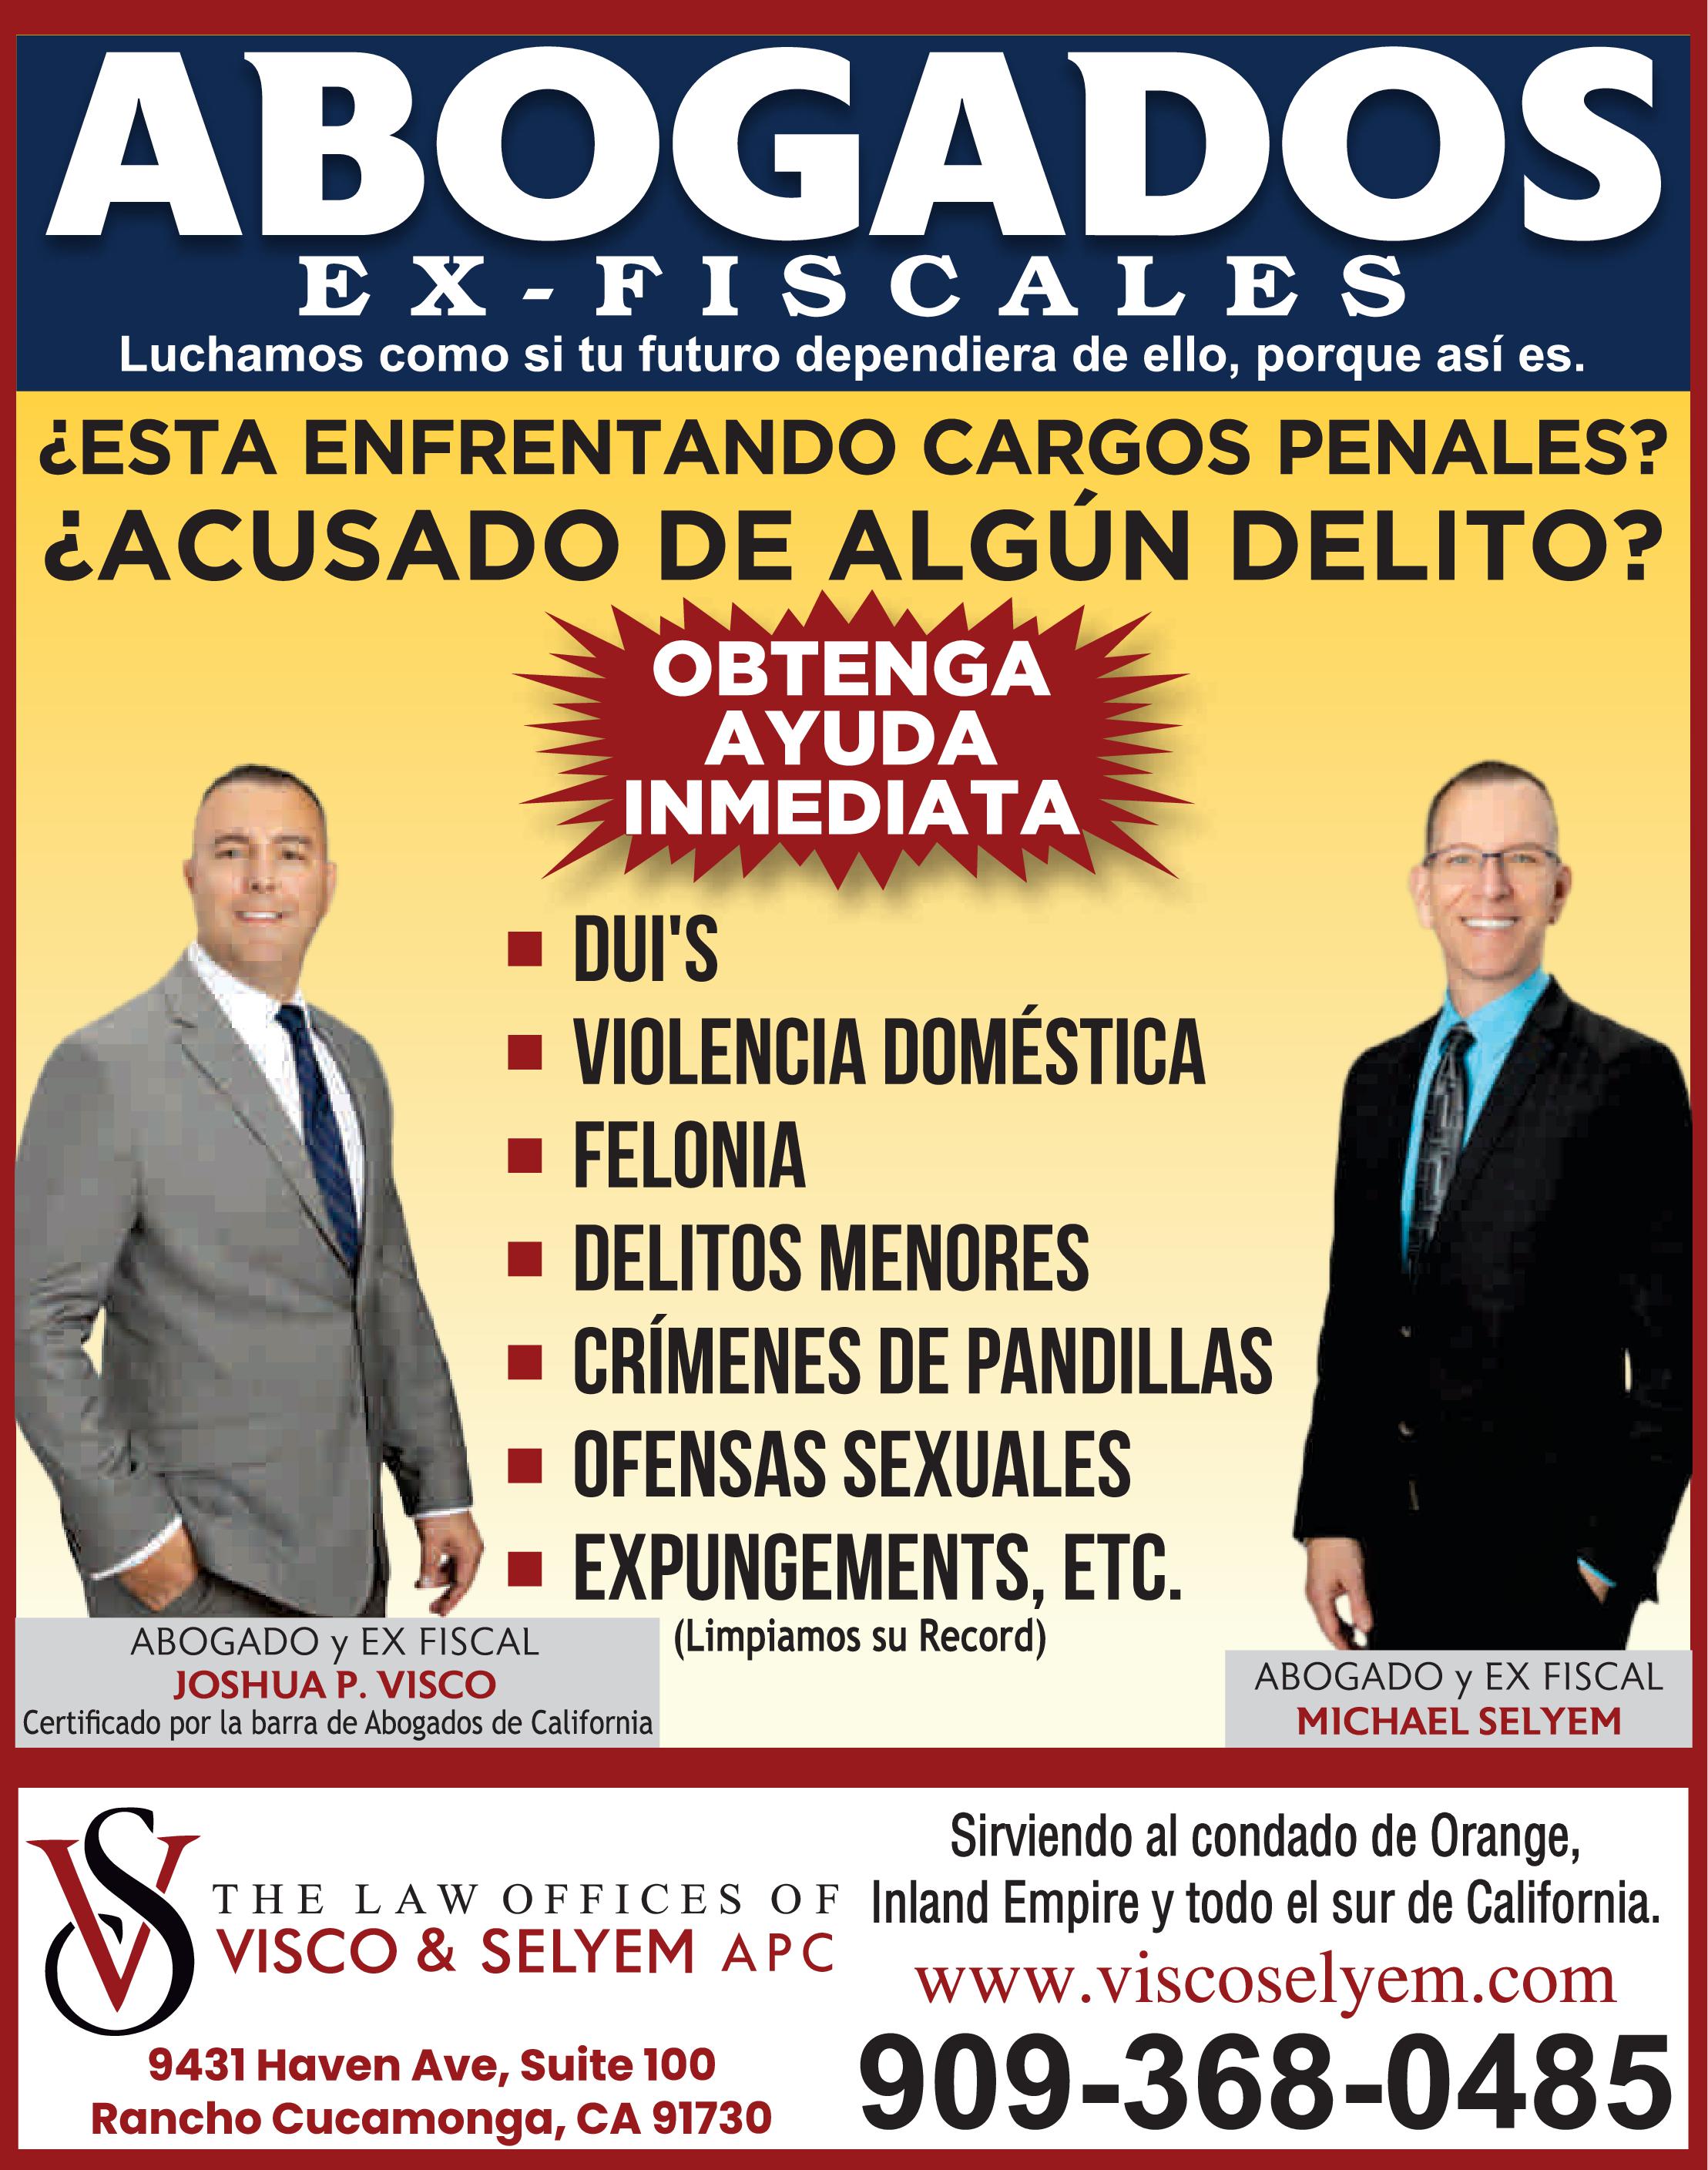 Law Offices Of Visco & Selyem Apc